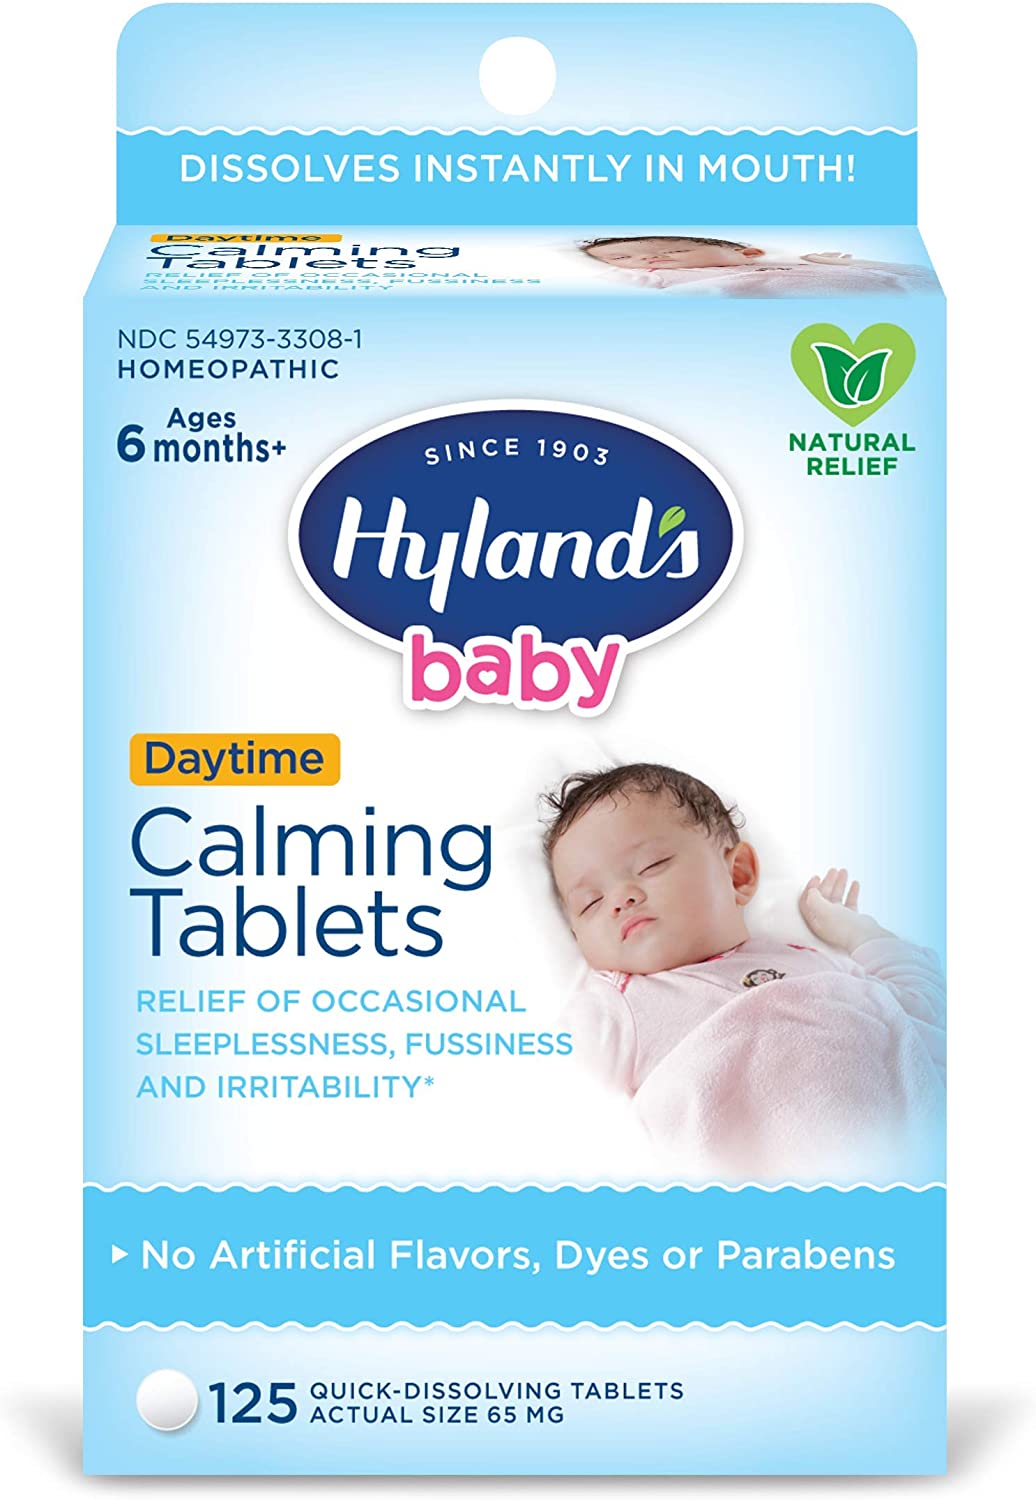 Baby Calming 125 tablets by Hylands